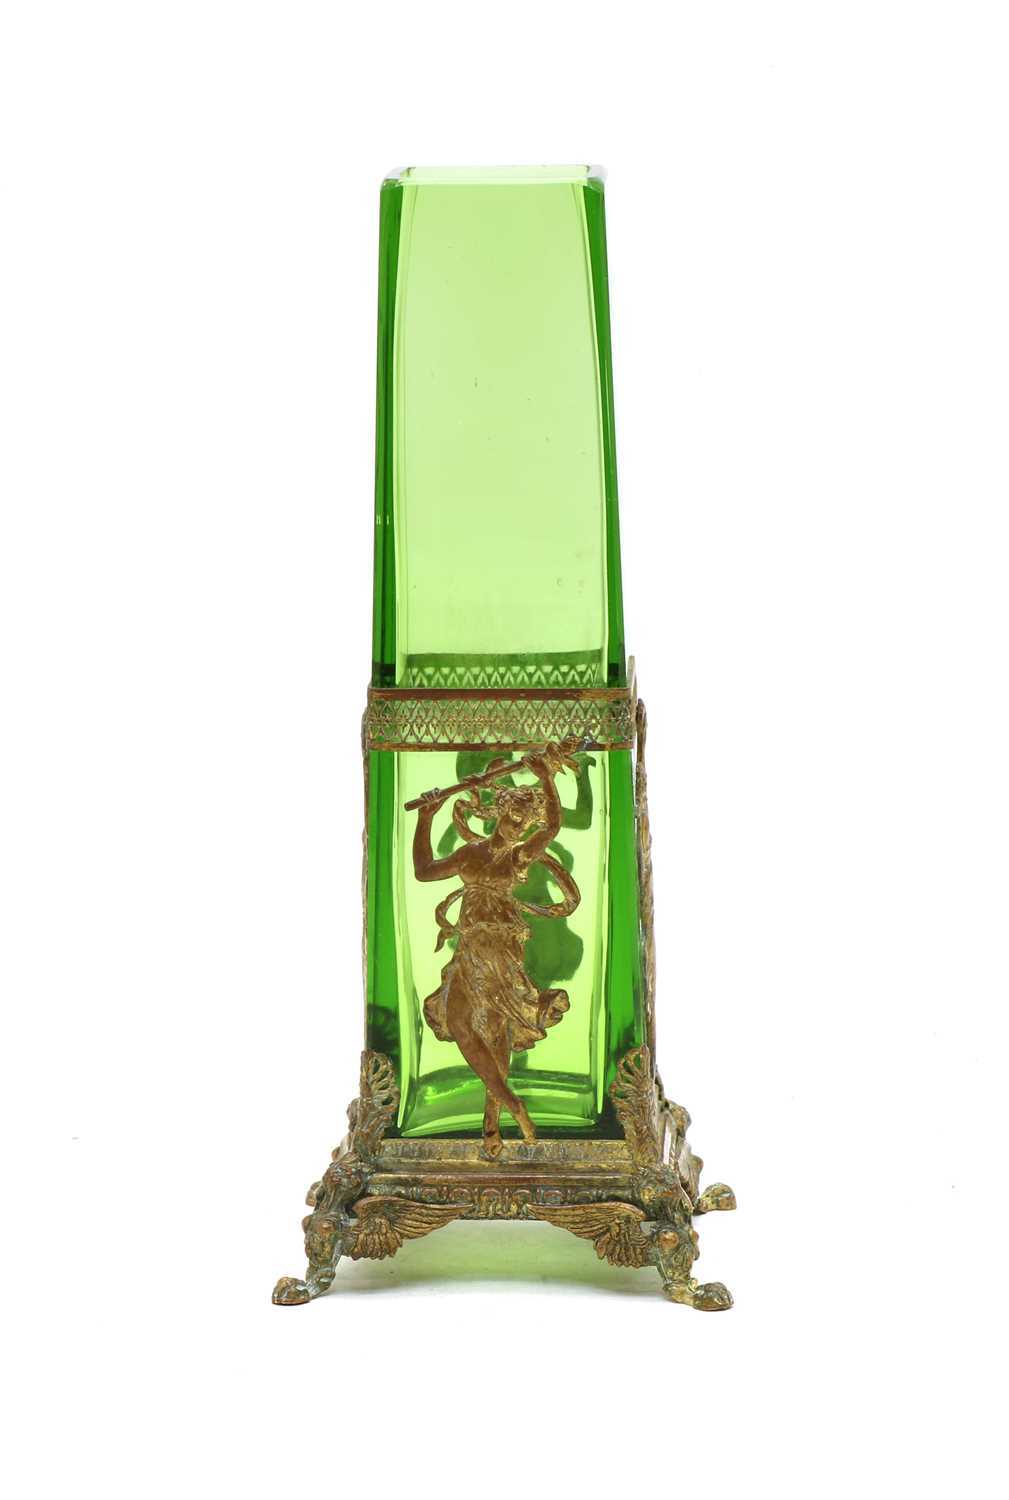 Lot 147 - A French green glass and metal mounted spill vase